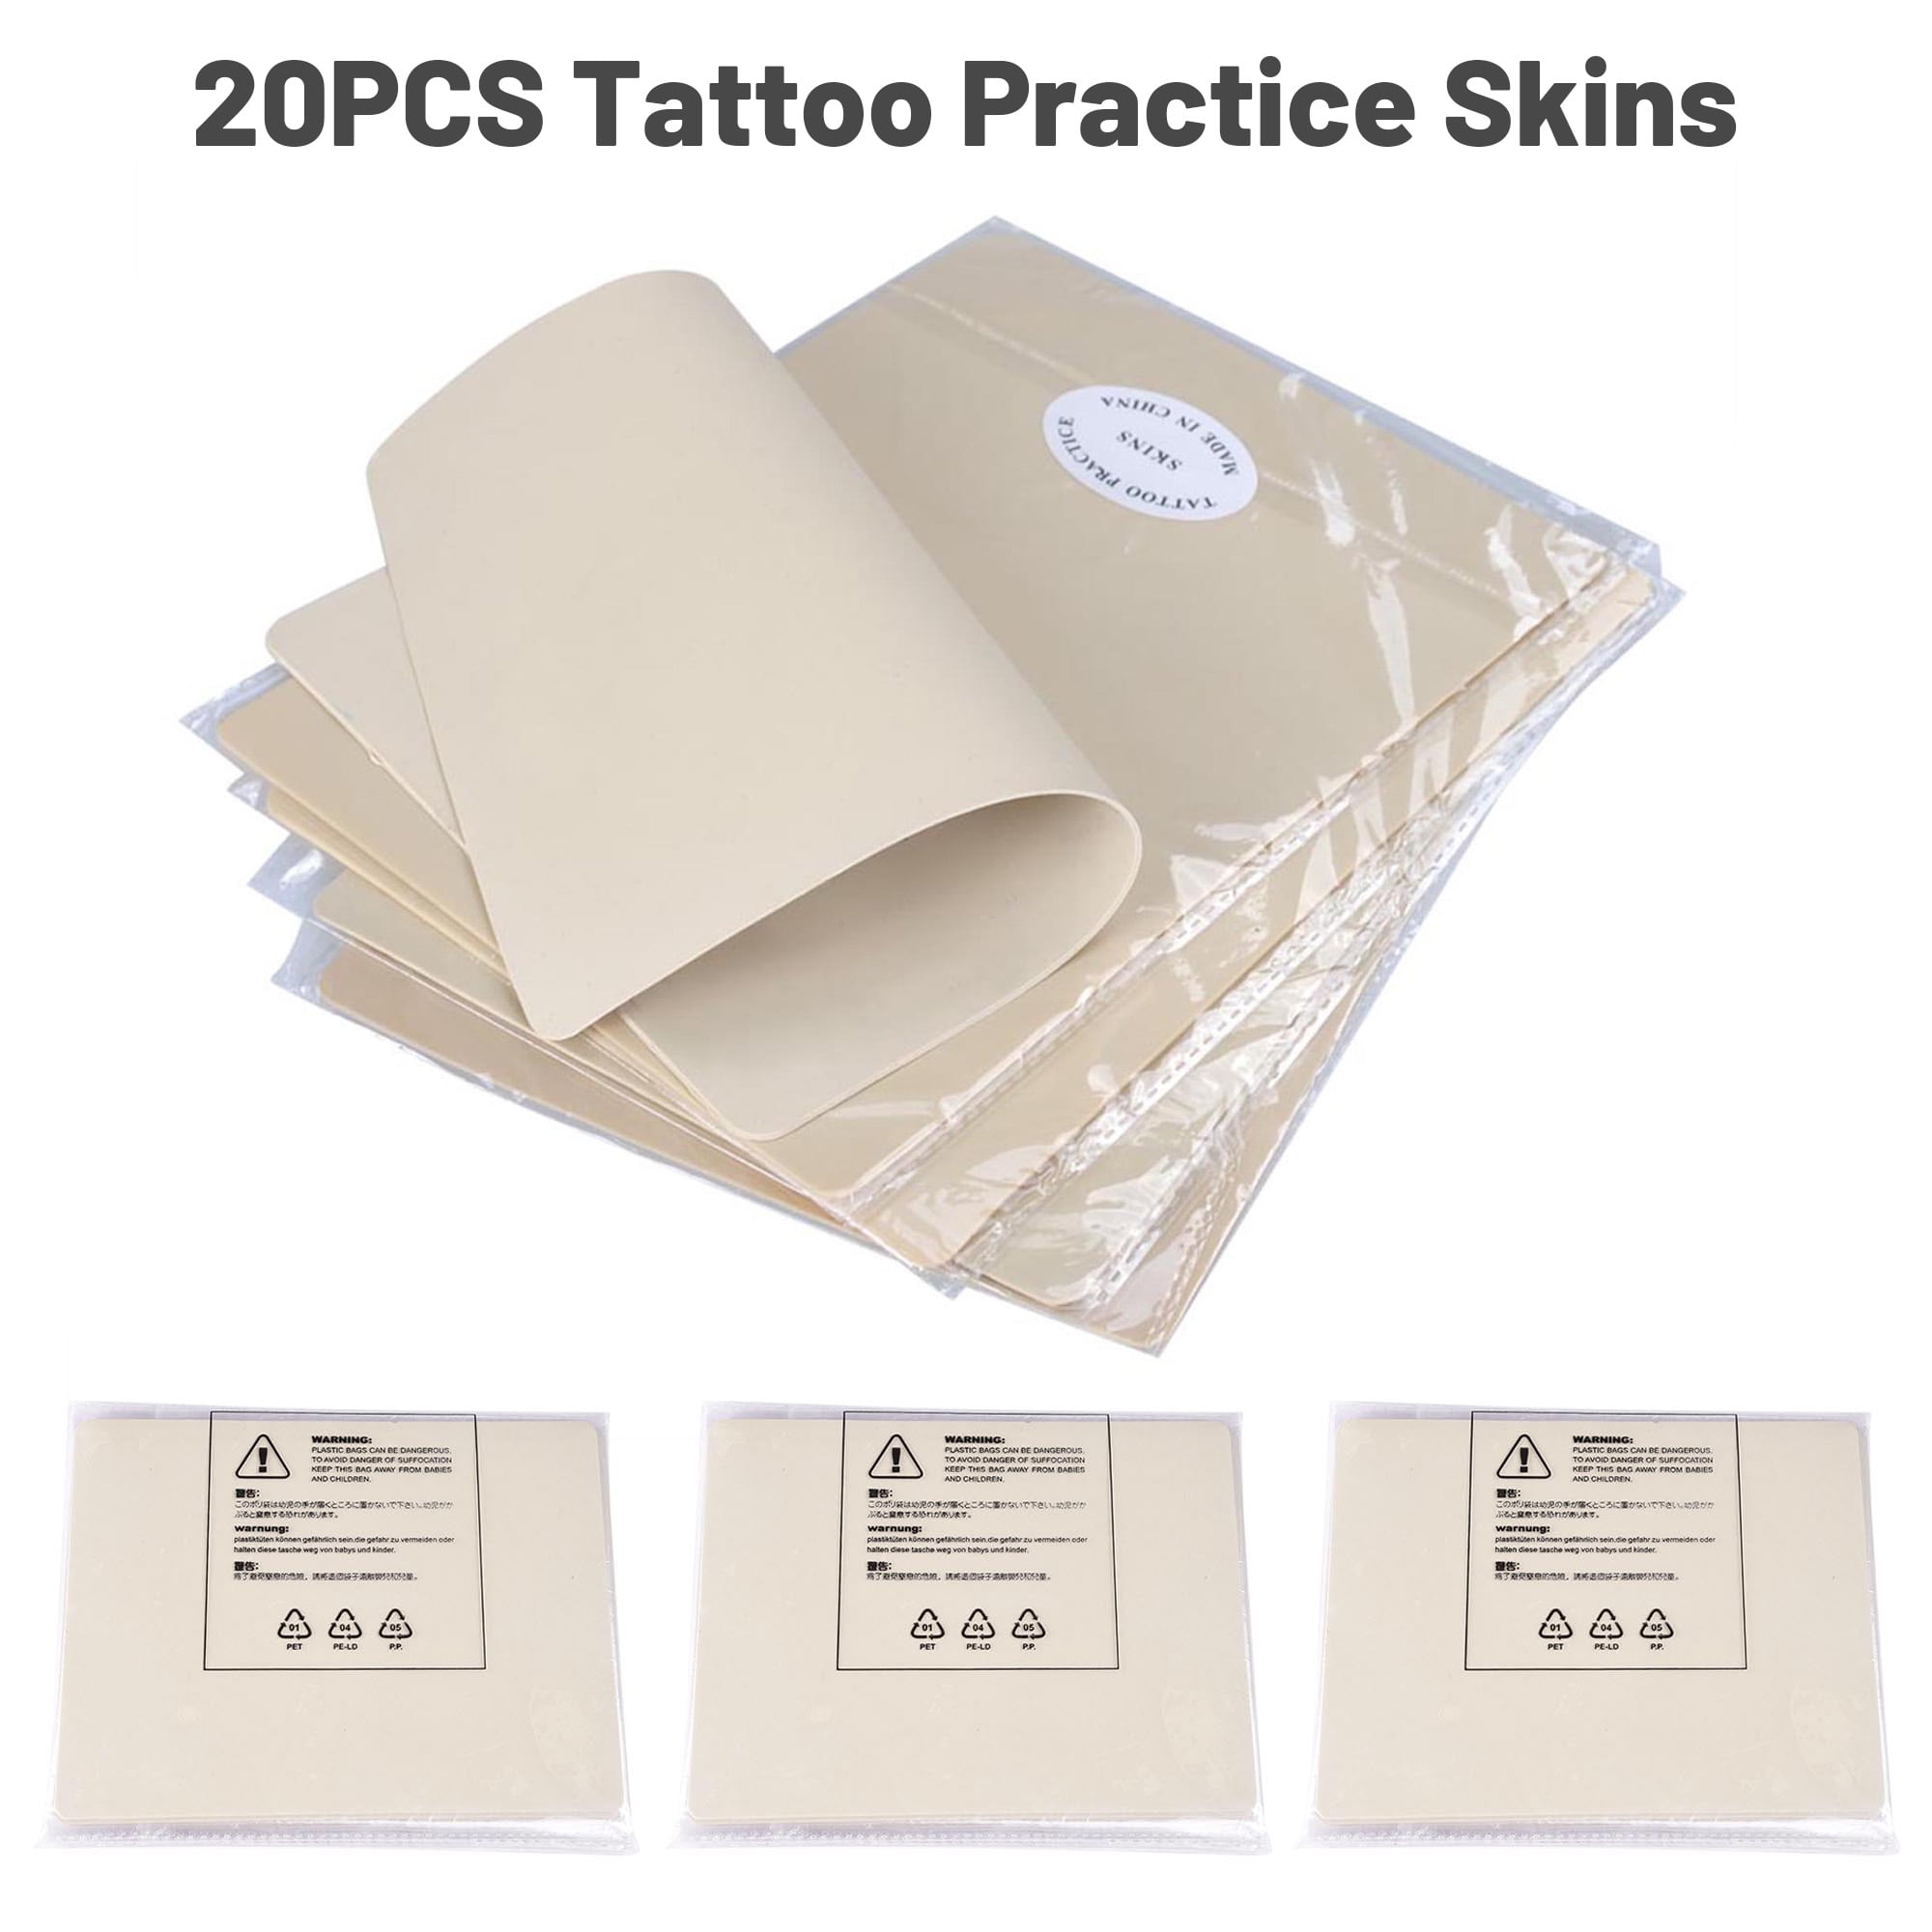 Tattoo Practice Skins for Sale